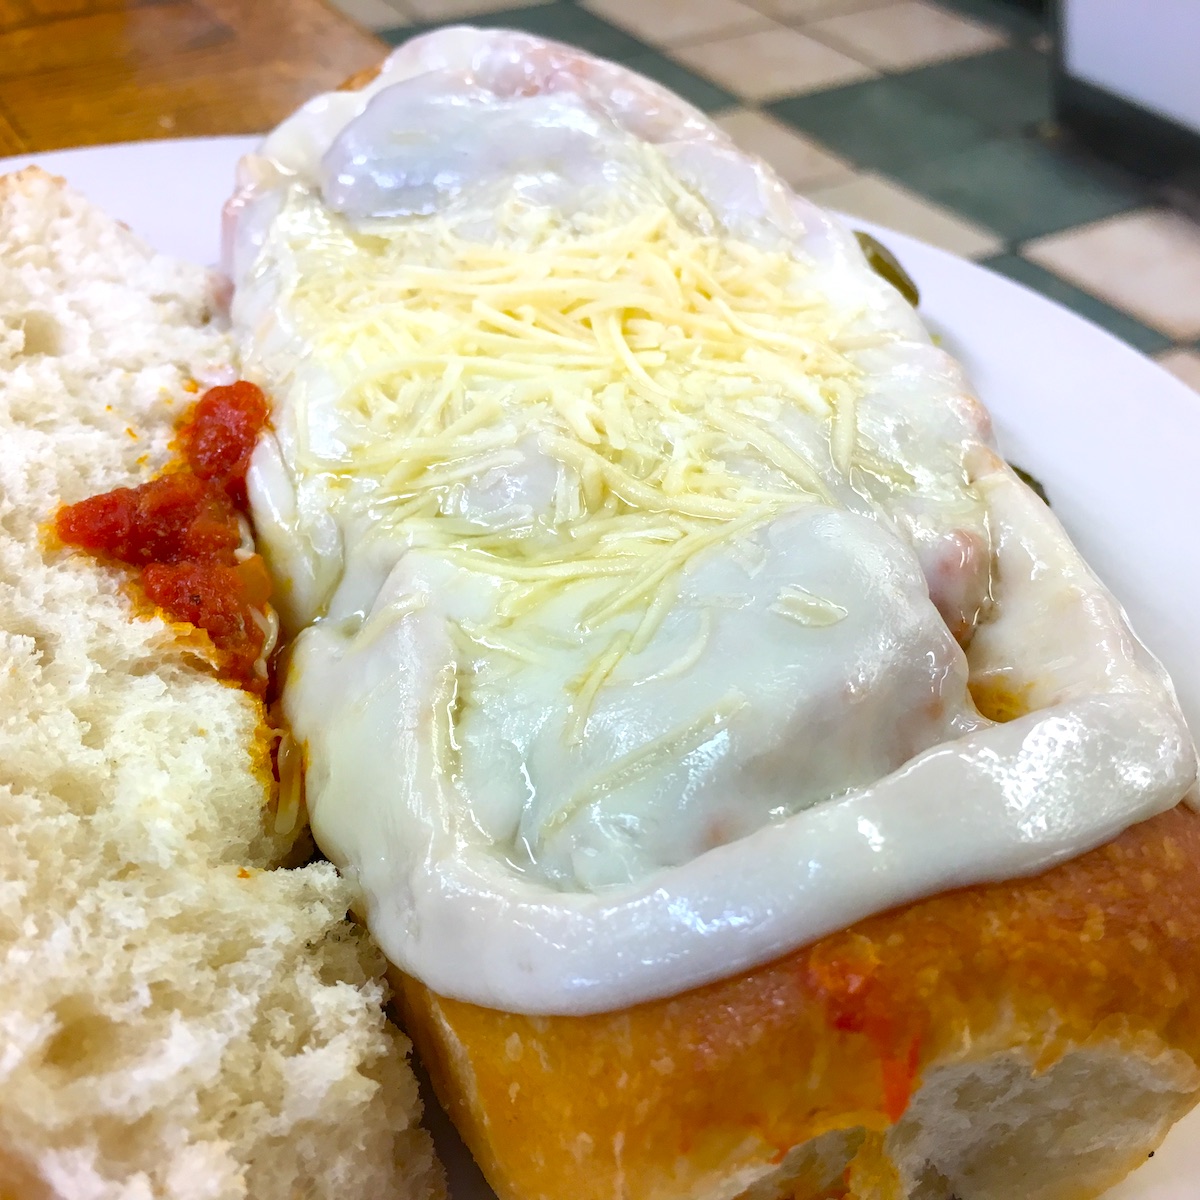 Meatball Sub from Pinegrove Market and Deli in Jacksonville, Florida